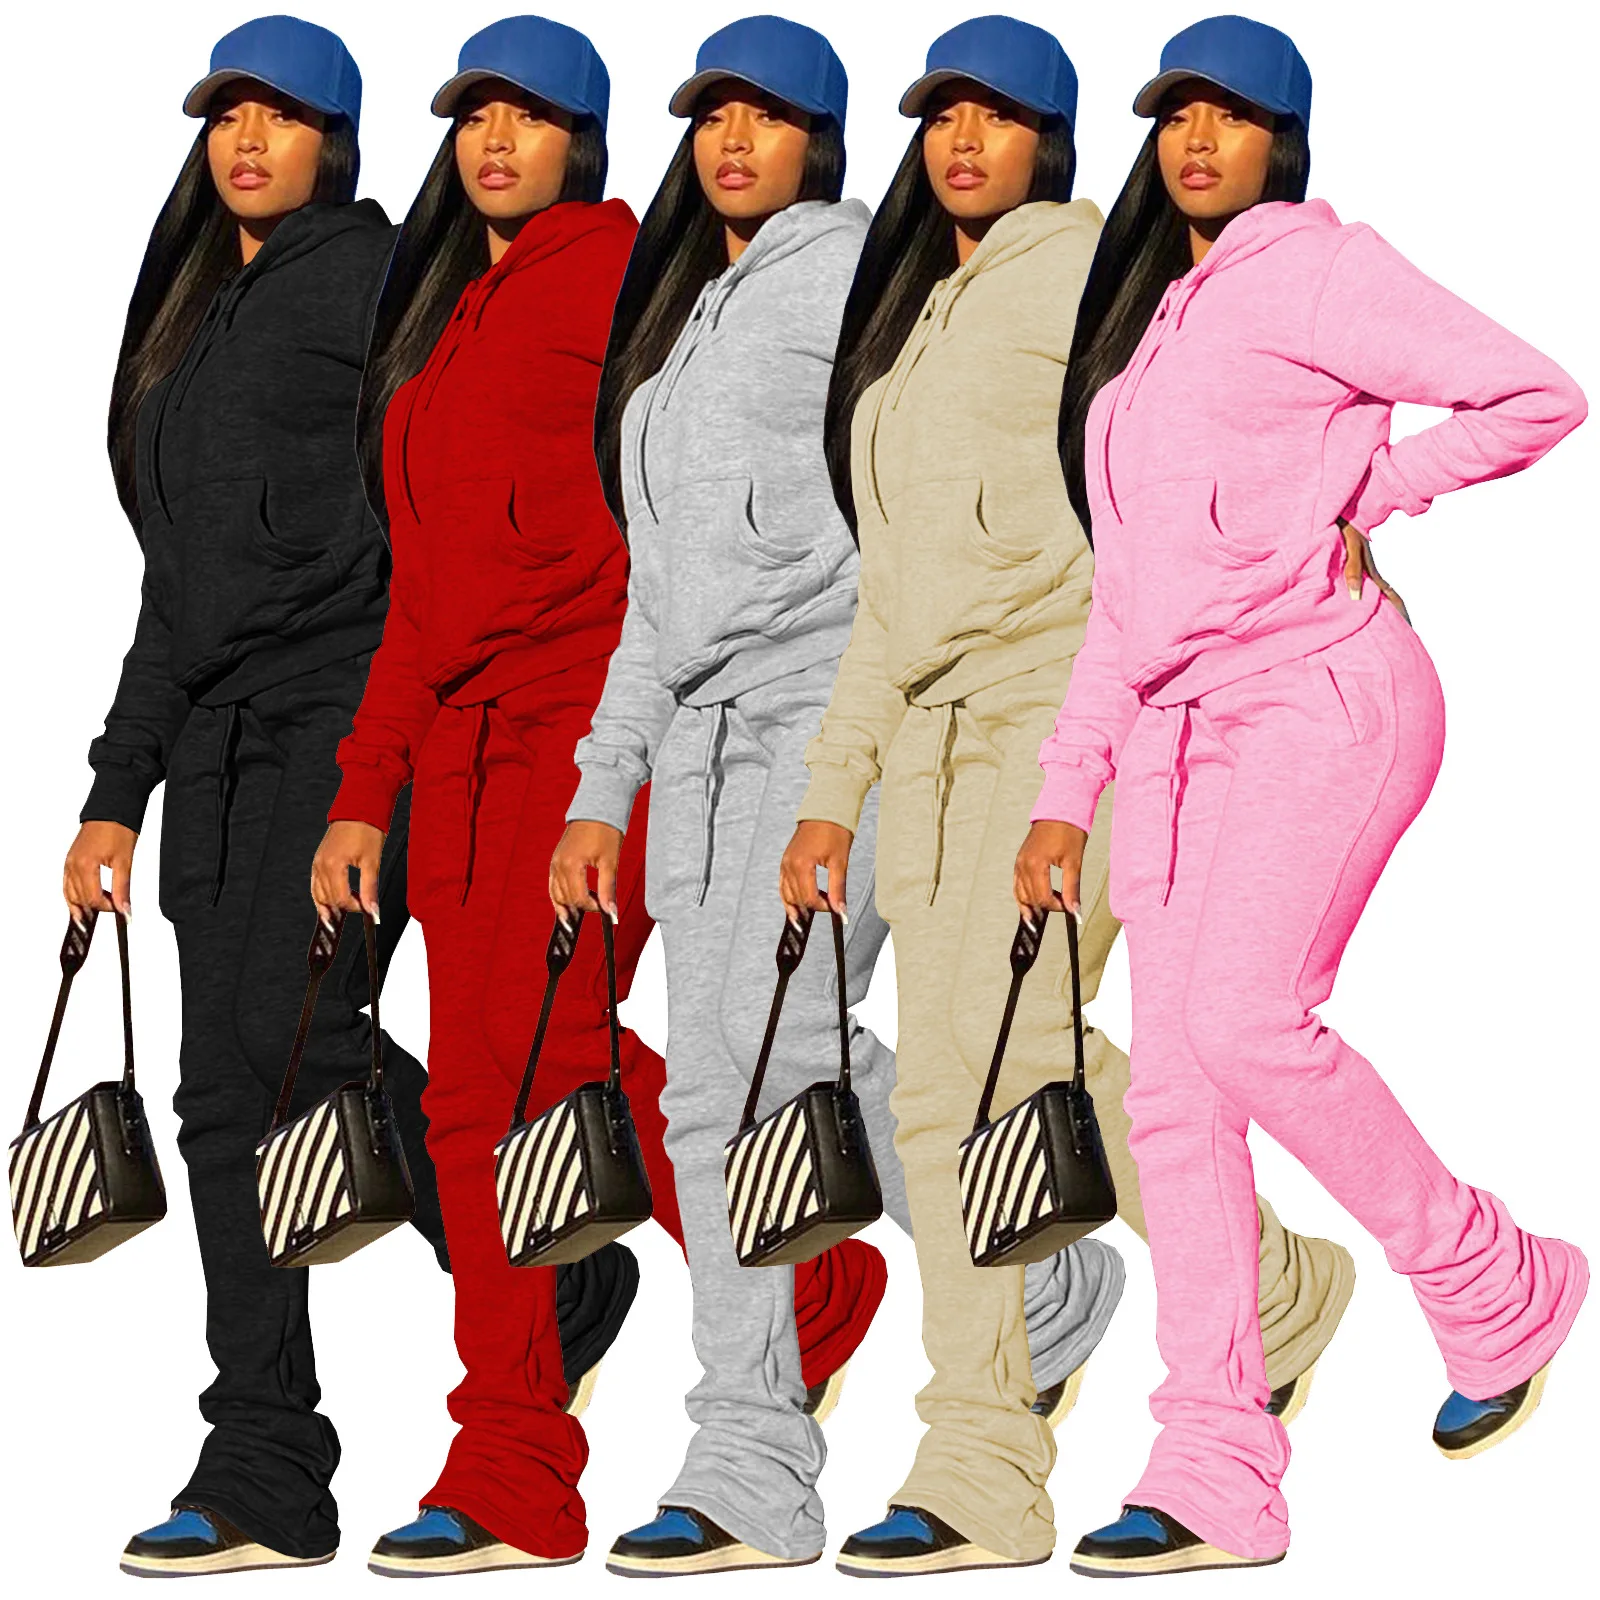 

J&H fashion 2022 new arrivals two piece pants set women's hoodies & sweatshirts stacked joggers lounge wear women clothing, 3 colors as picture